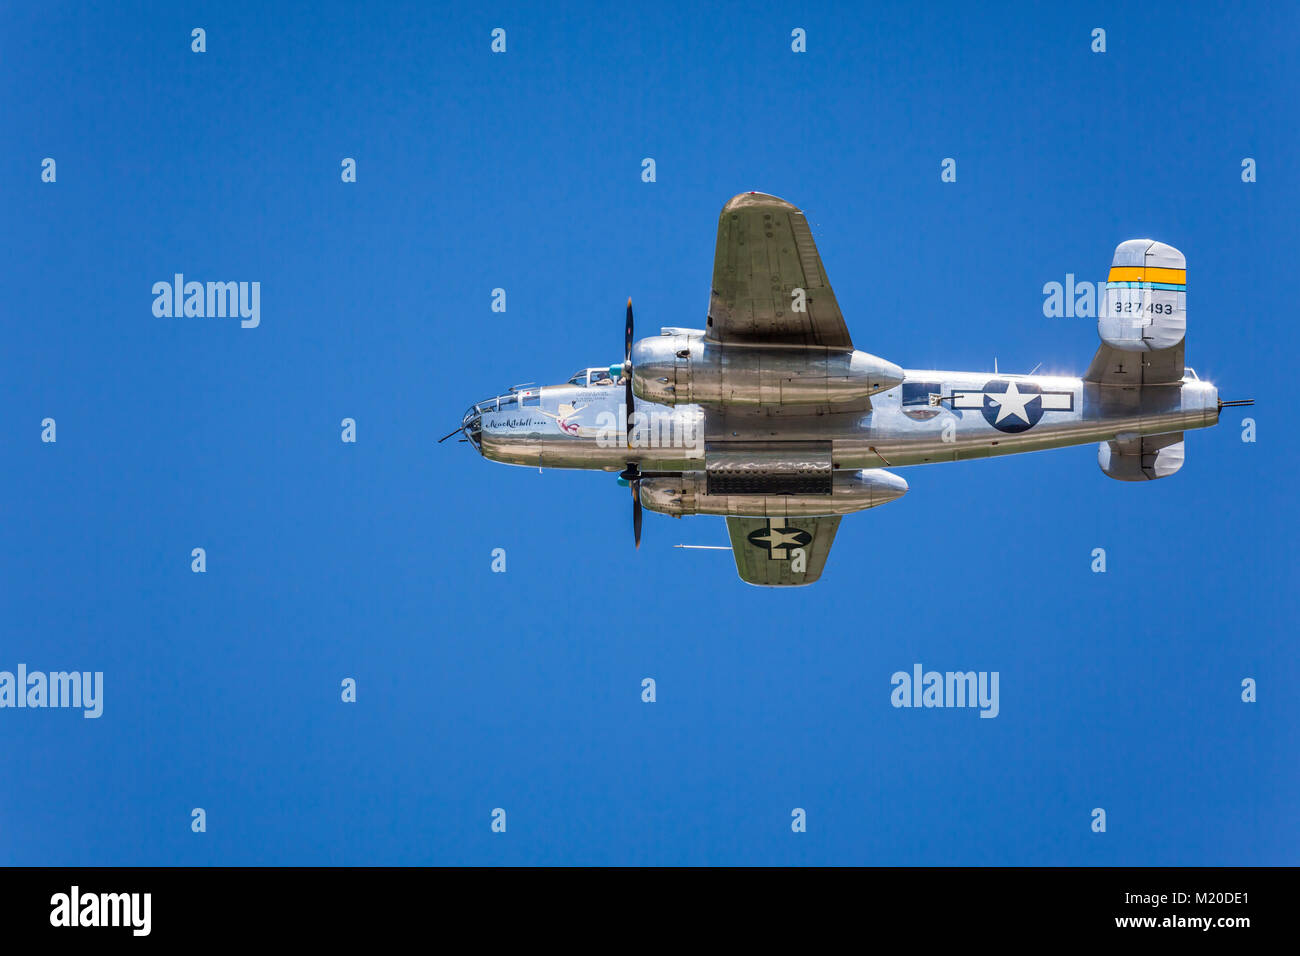 The Boeing B-25J Miss Mitchell vintage bomber in flight at the 2017 Airshow in Duluth, Minnesota, USA. Stock Photo